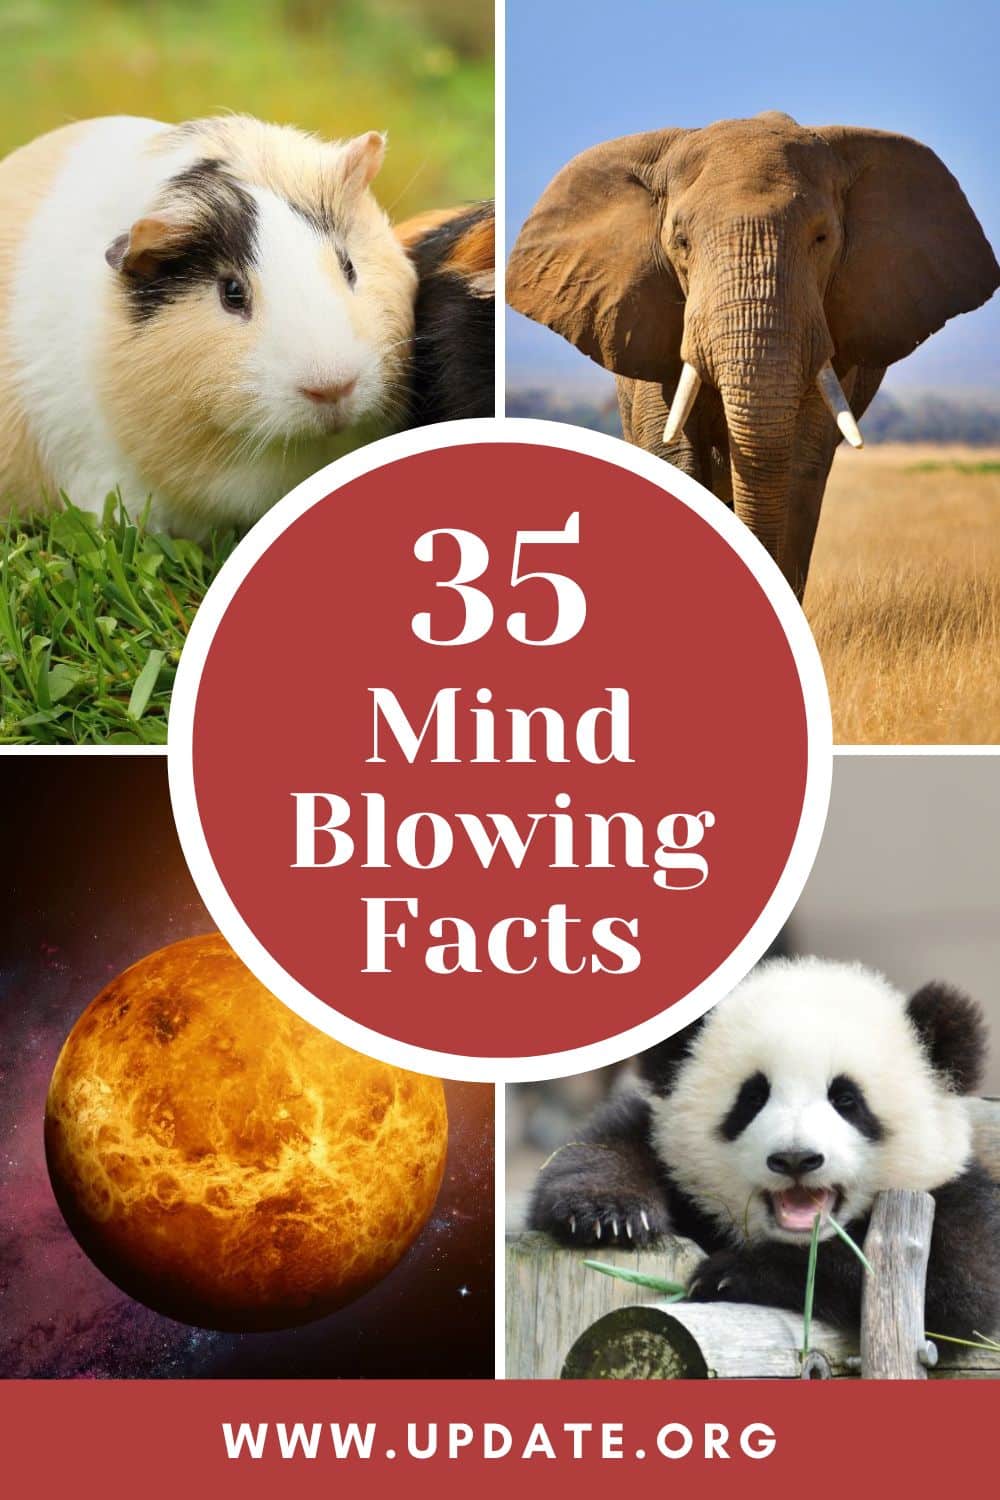 35 Mind Blowing Facts pinterest image.